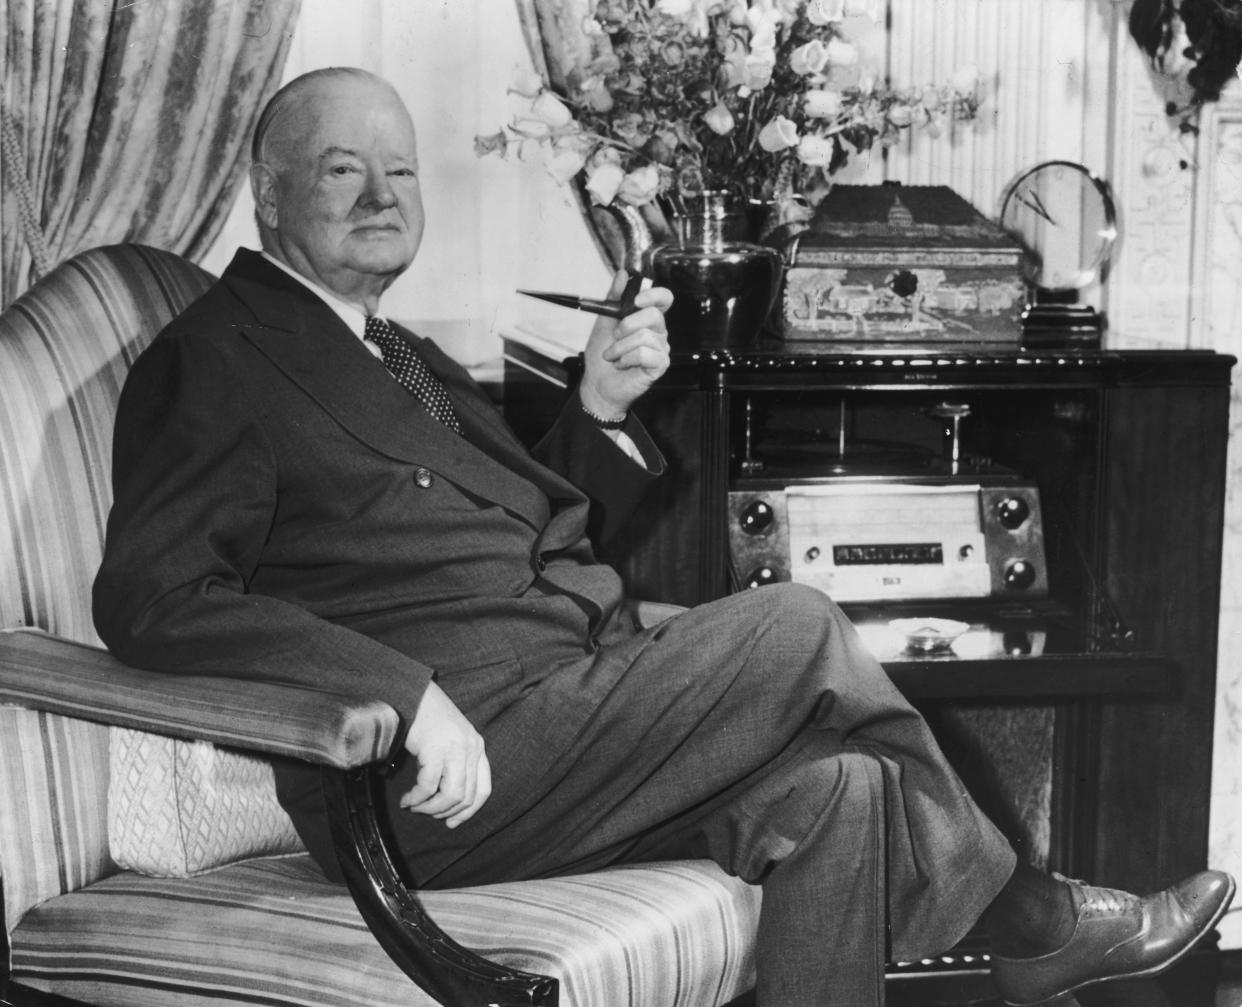 circa 1962:  Portrait of former American president Herbert Hoover (1874 - 1964) seated in an armchair with a pipe in his suite at the Waldorf Towers, New York City.  (Photo by Hulton Archive/Getty Images)